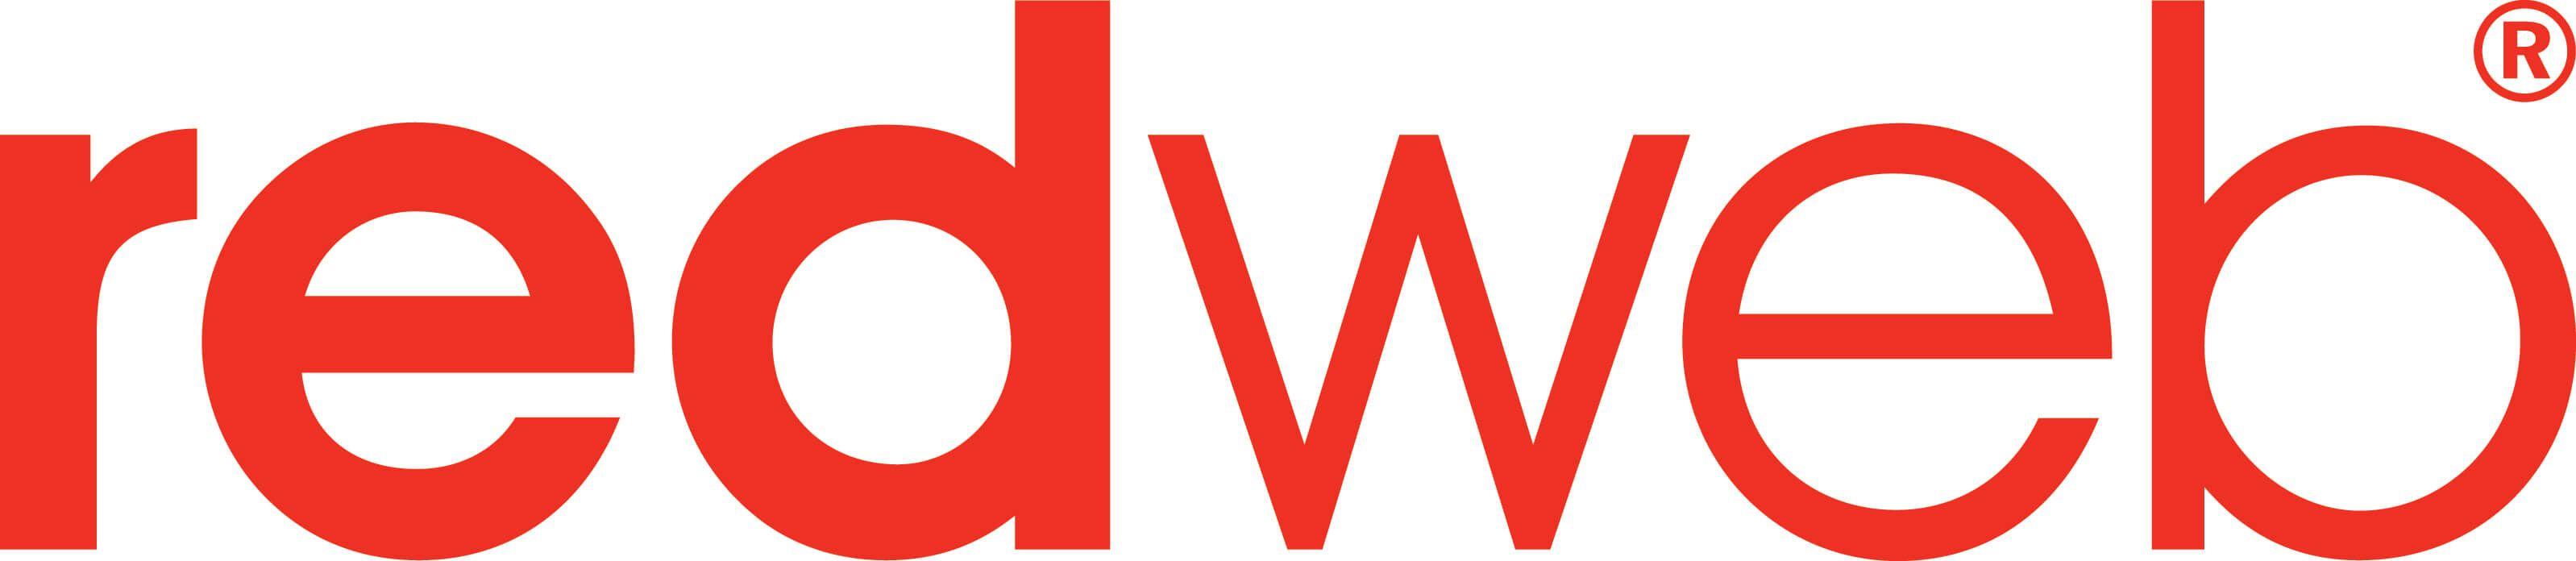 A Red Web Logo - Our Customers. Iomart Group plc